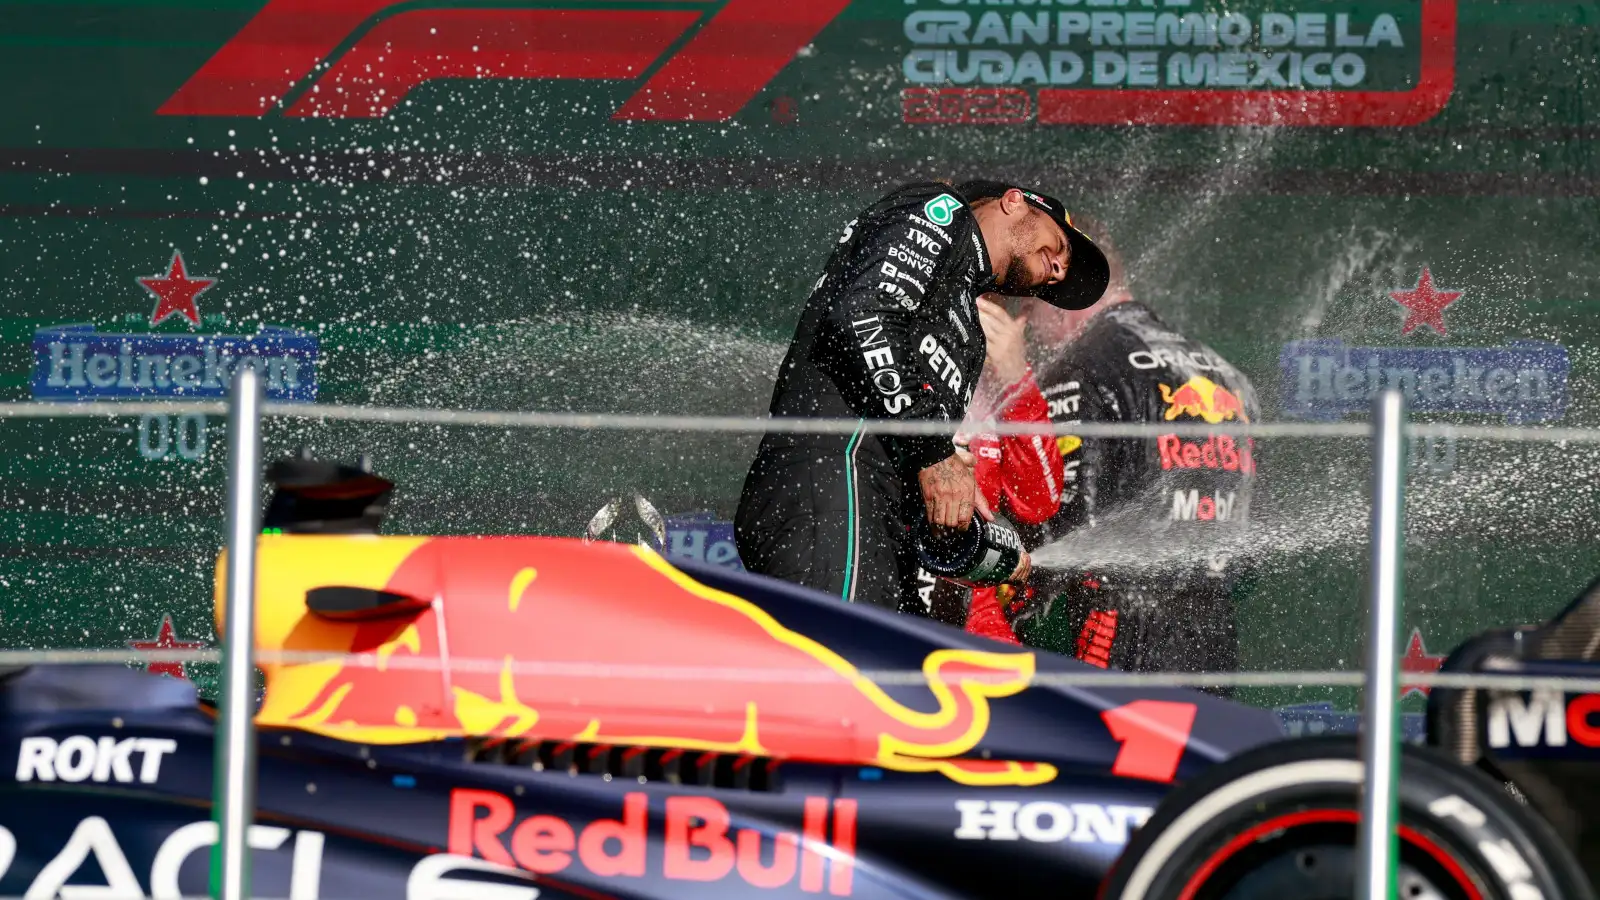 Mercedes driver Lewis Hamilton on the podium with Max Verstappen and the RB19.